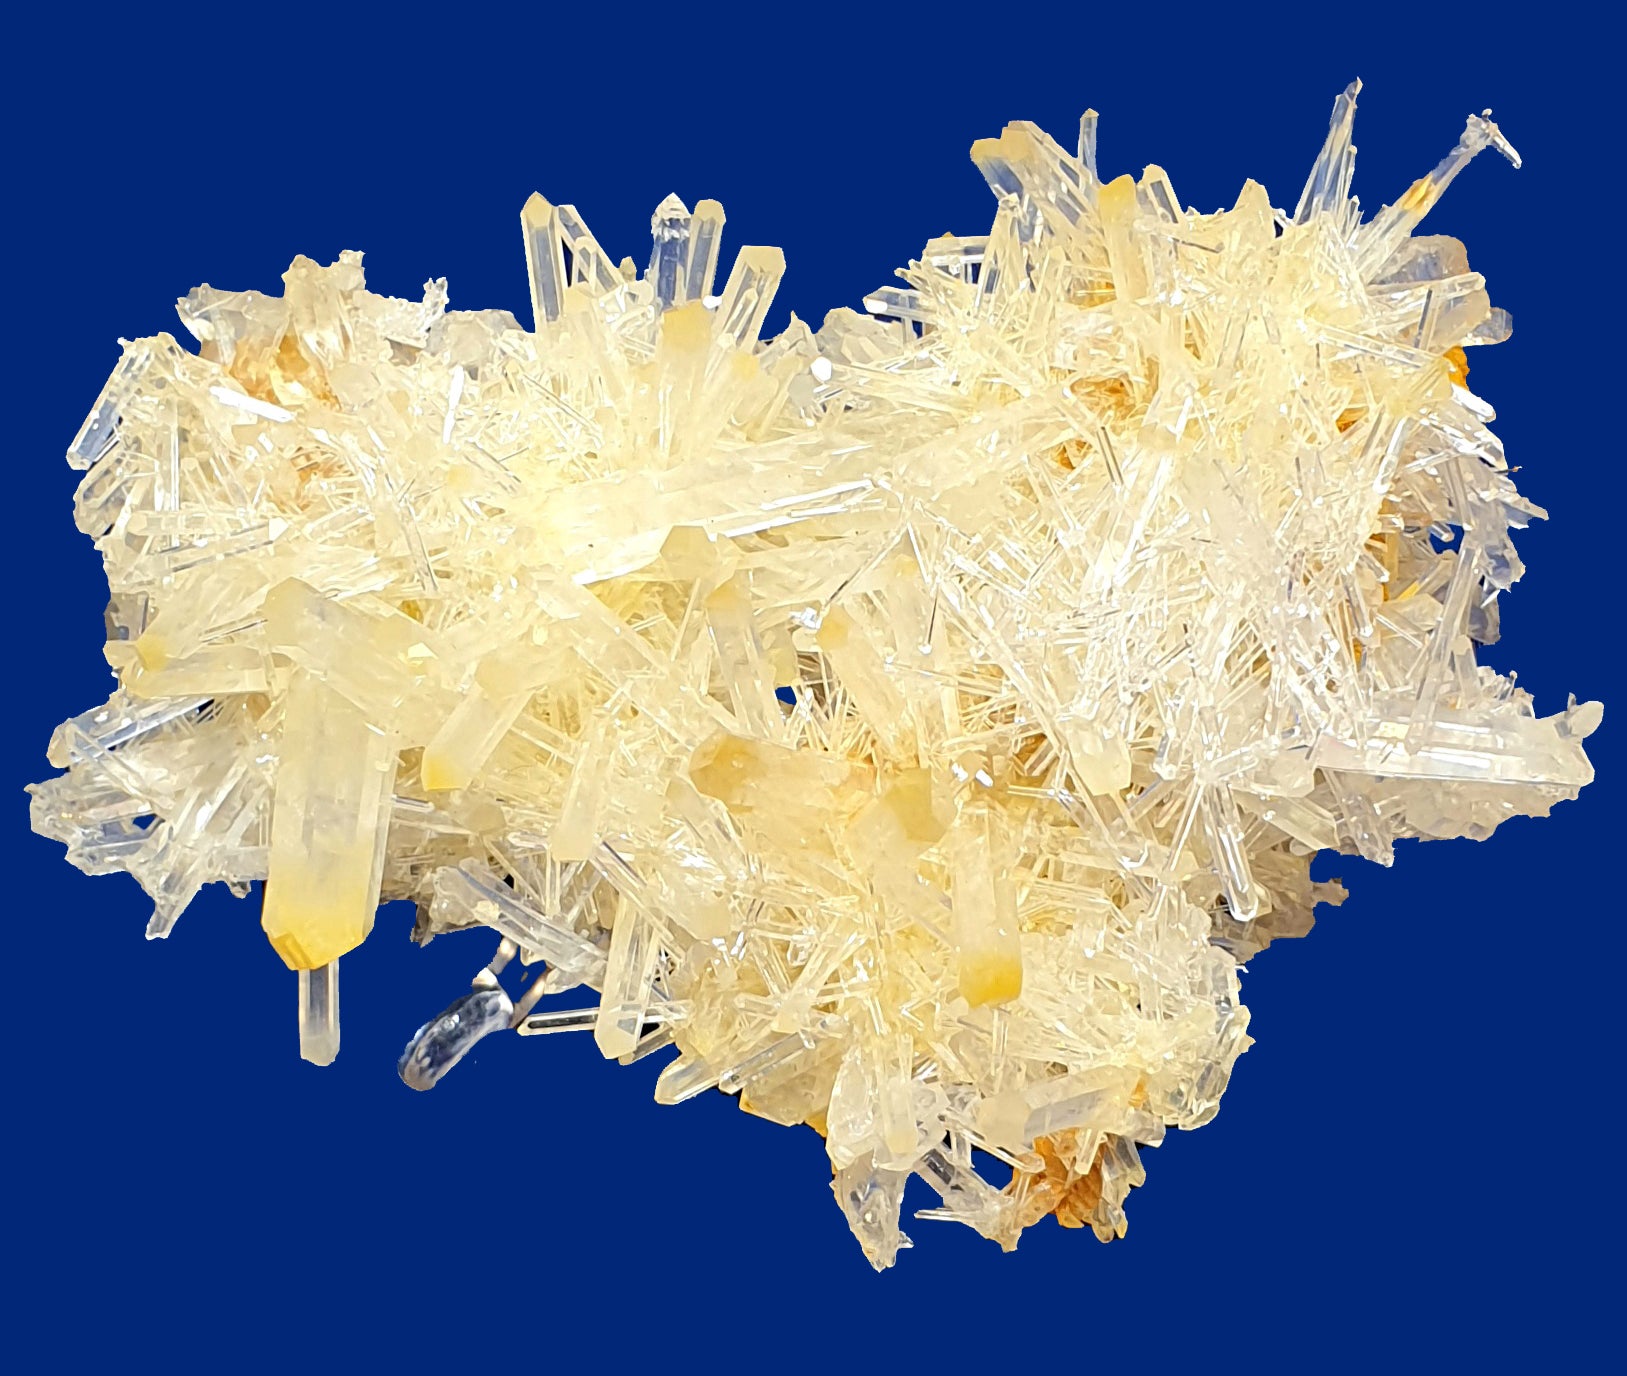 Mango Quartz is crystal clear with yellow tips, fine quartz fingers, large points with crown effect. White with yellow/orange tips irregular shape